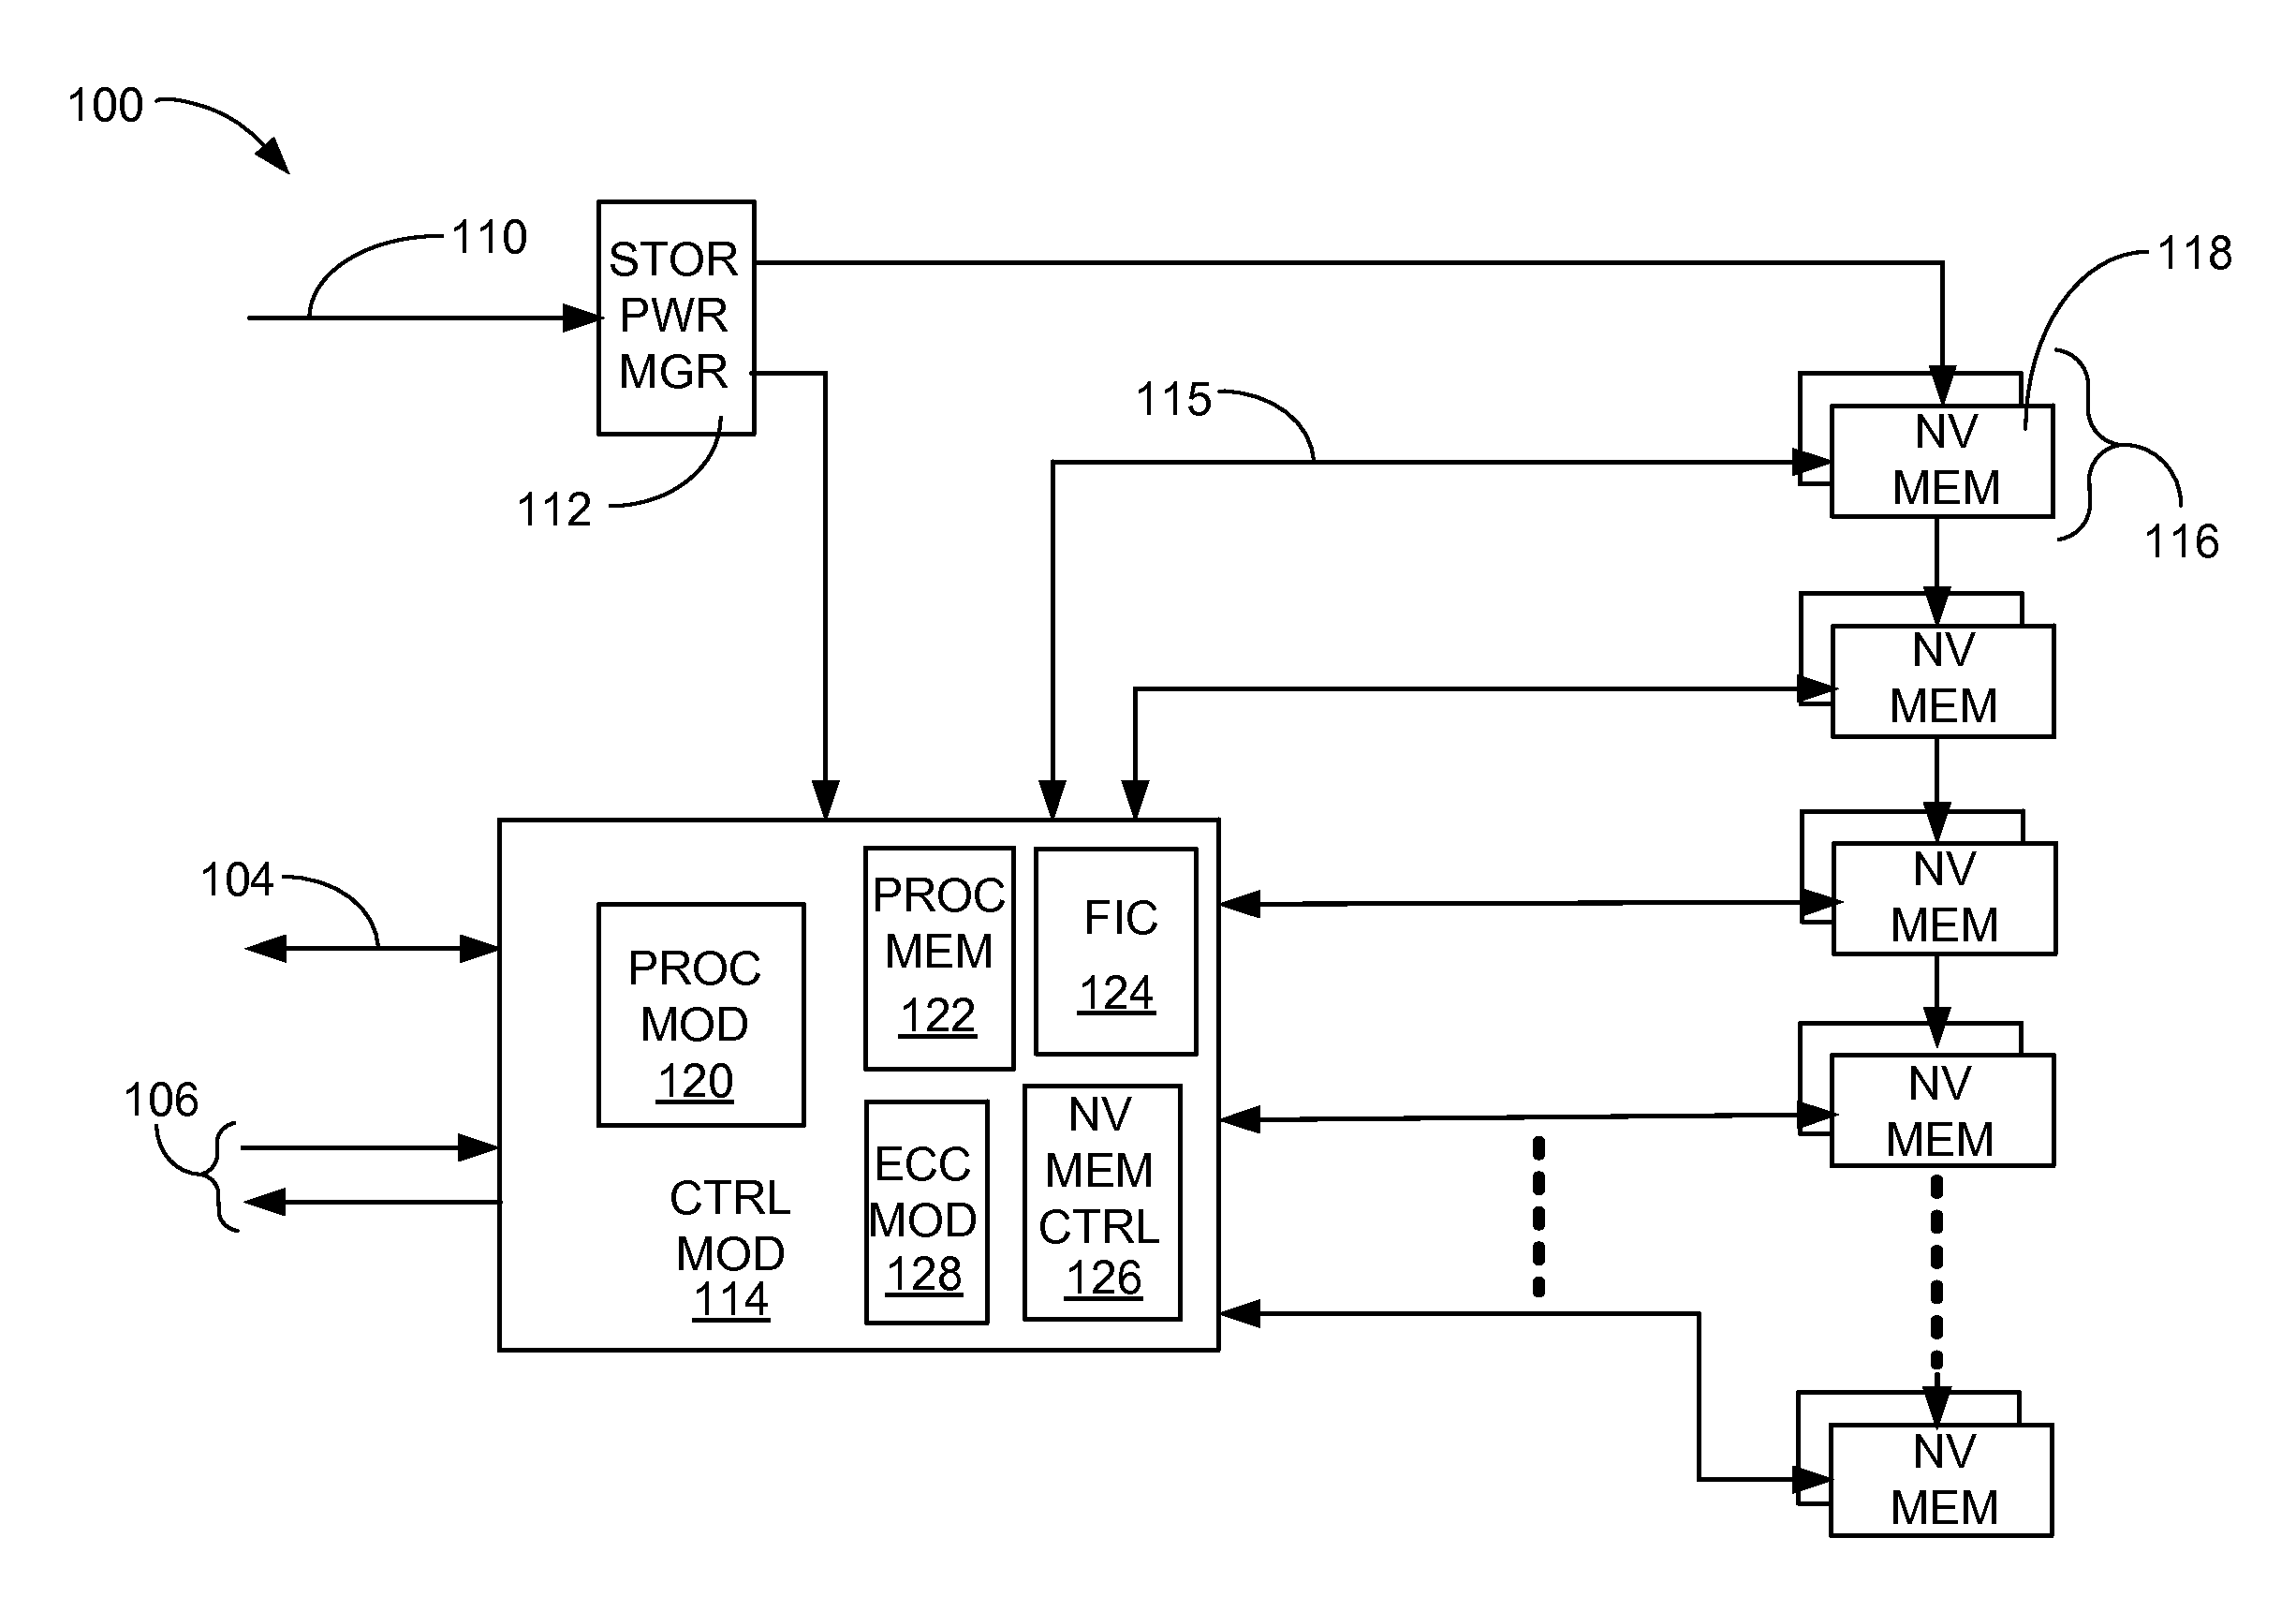 Bandwidth optimization in a non-volatile memory system